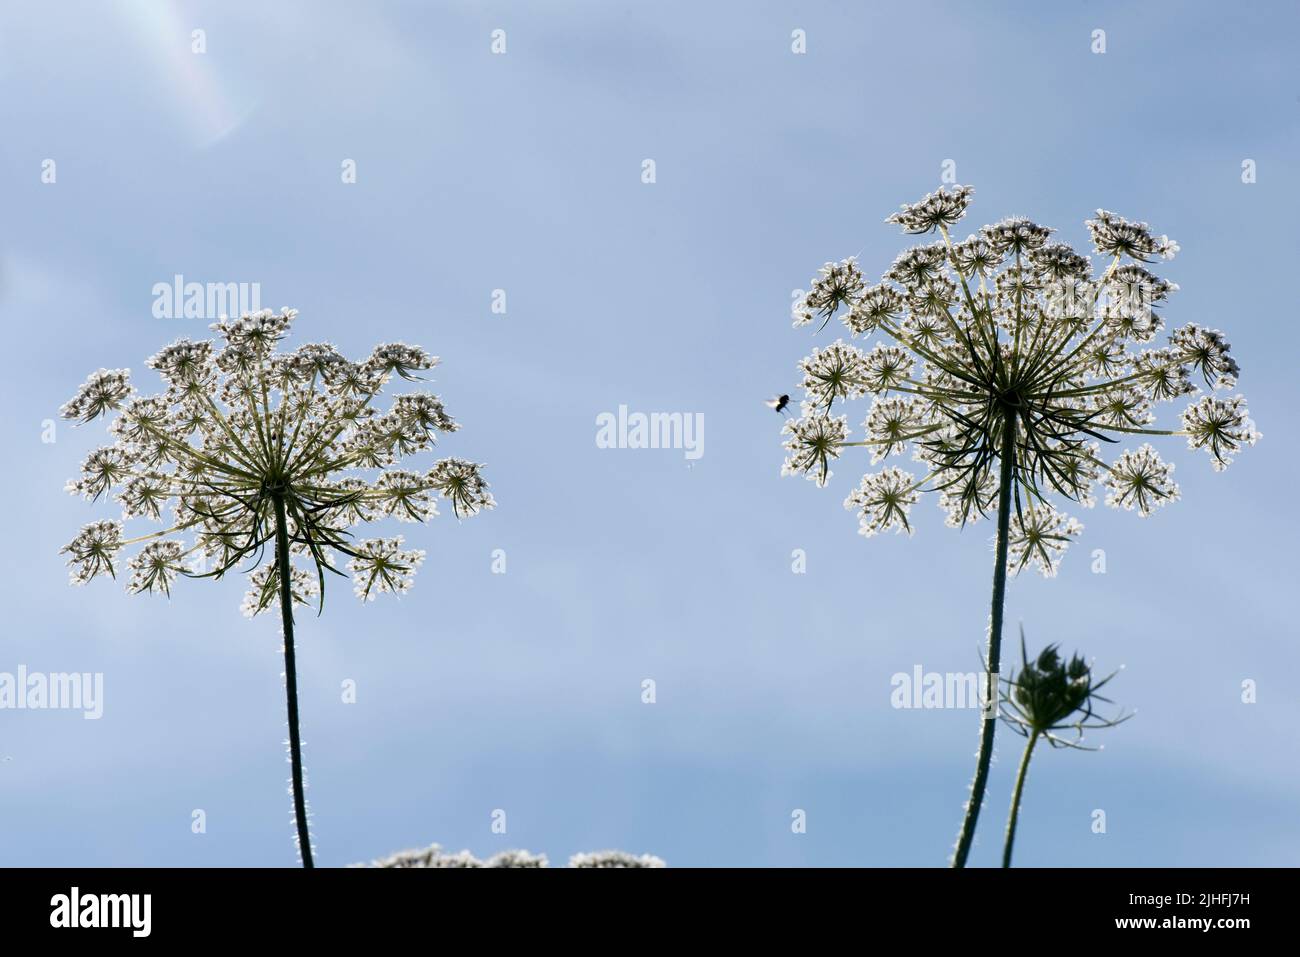 Wild carrot or Queen Anne's lace (Daucus carota) looking up at two flowering umbels against a blue sky, Berkshire, July Stock Photo